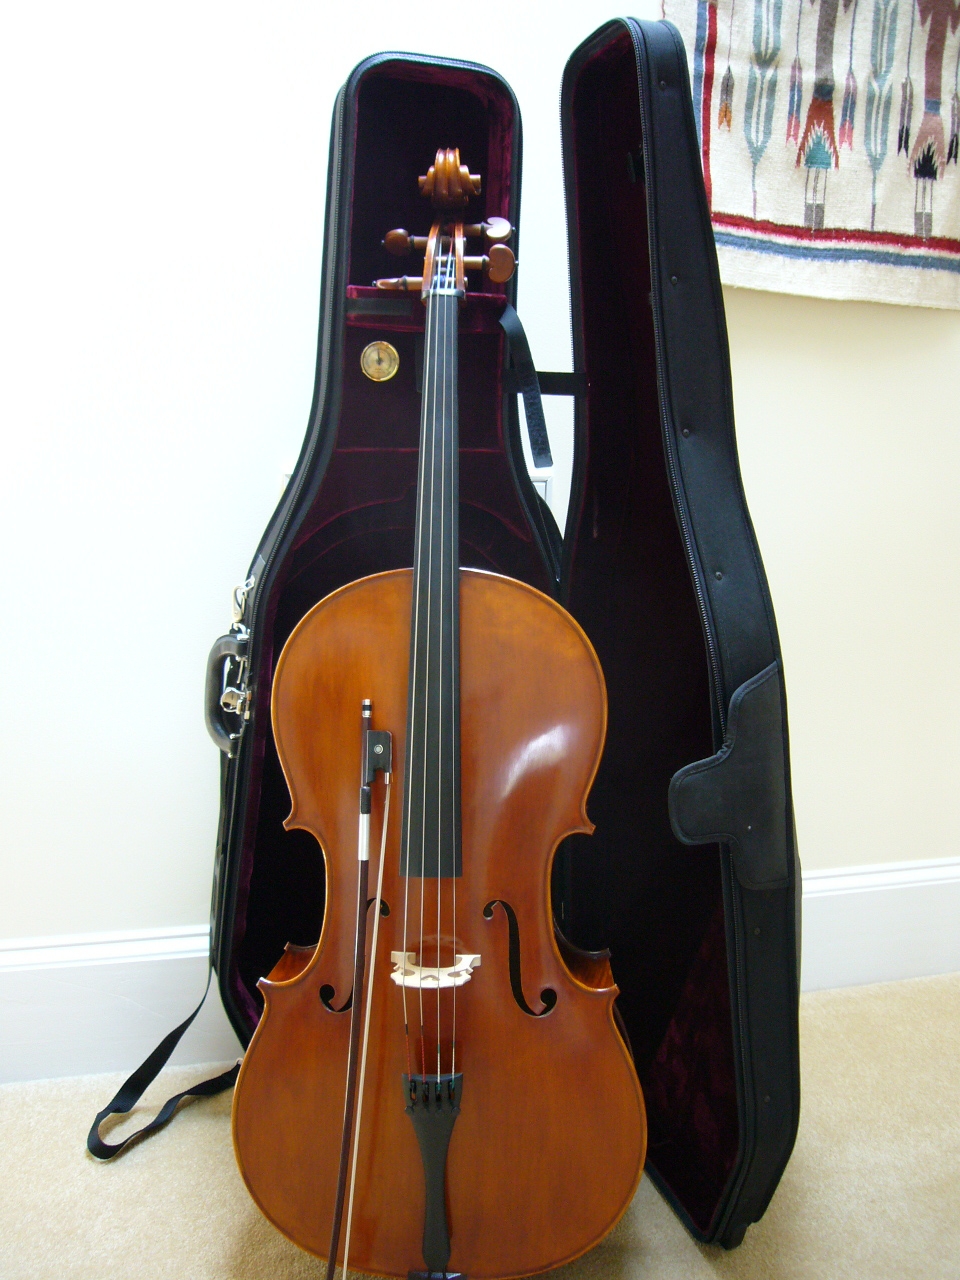 William Monical cello #1127, bow, and case